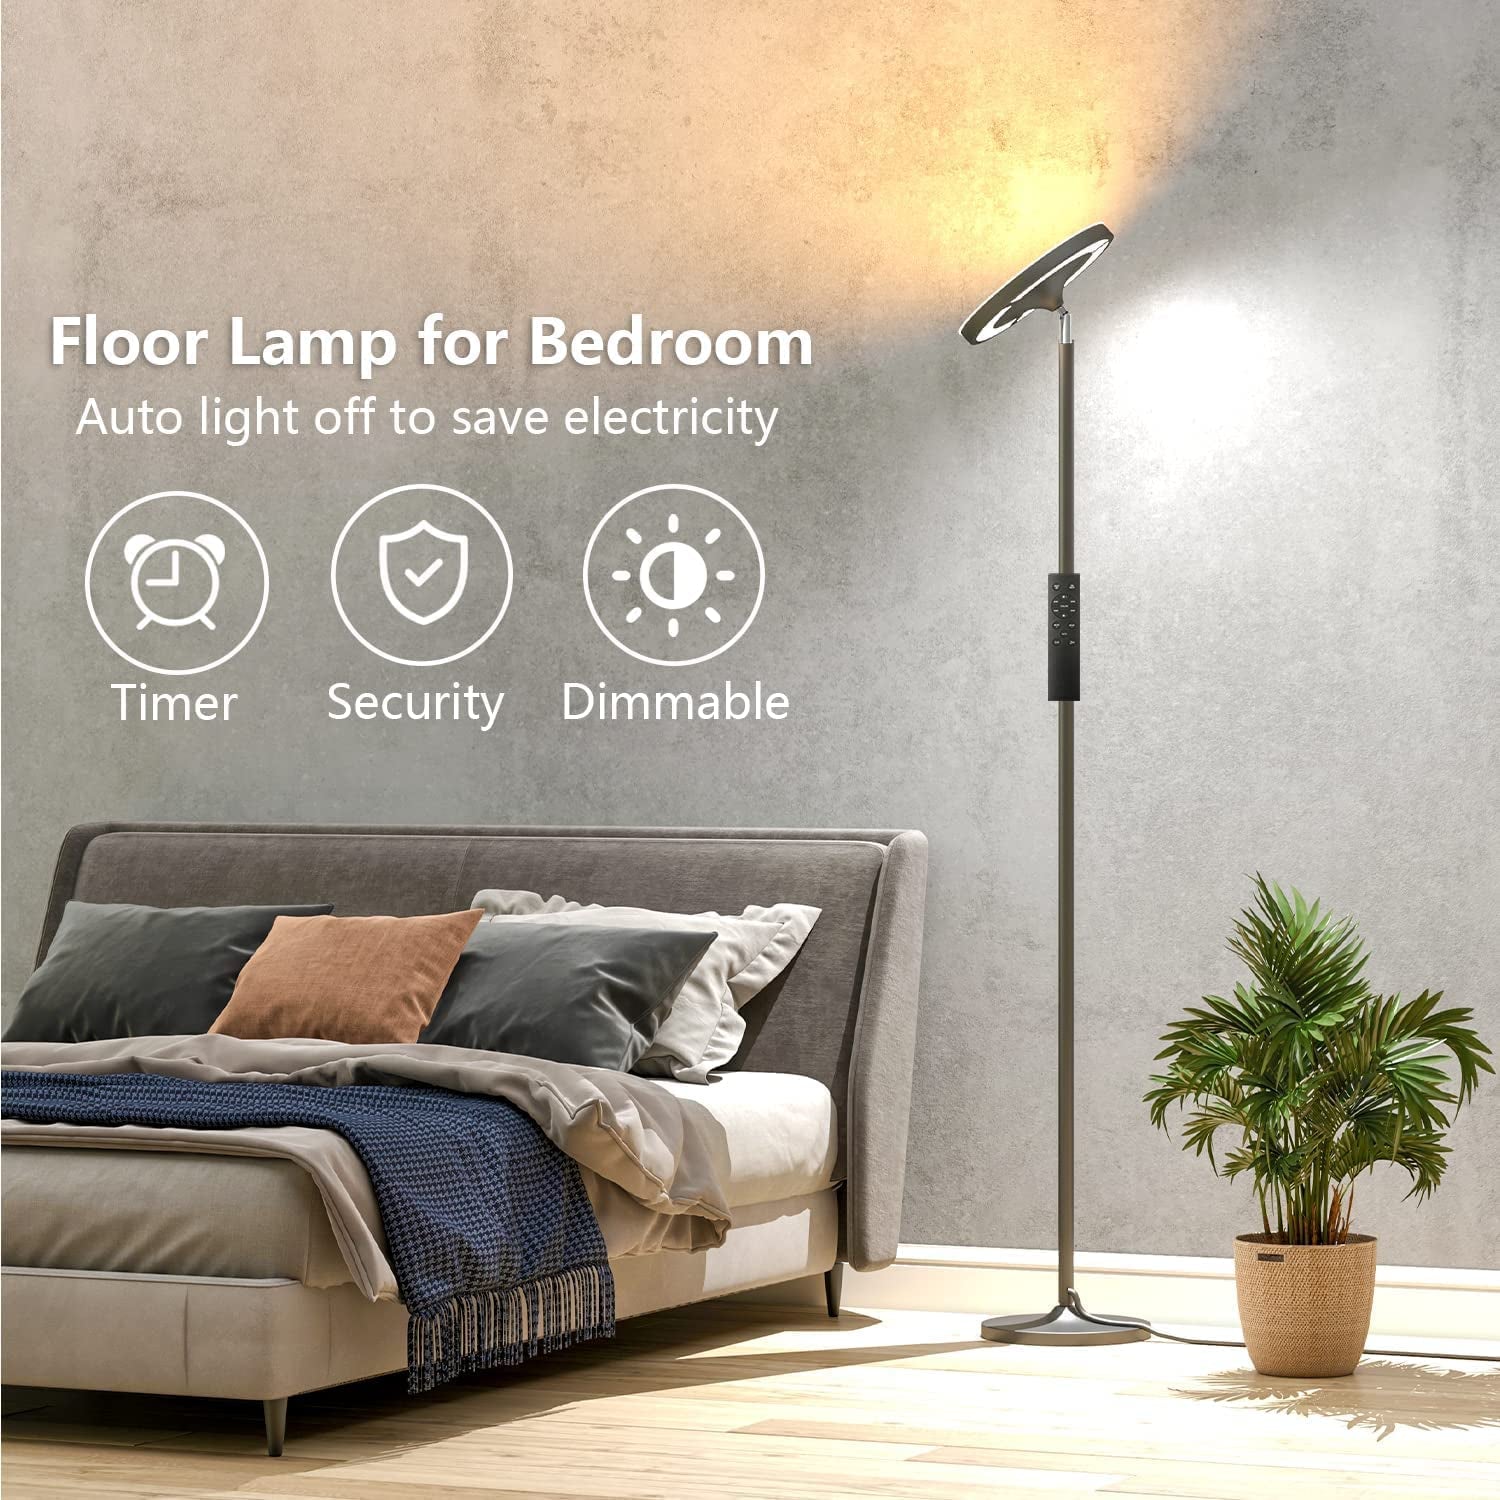 Double Sided Lighting LED Floor Lamp with Remote Smart App 36W 2600LM Bright Tall Standing RGB Floor Lamp Angle Multicolor Dimmable Modern Floor Lamps for Living Room Bedroom Office